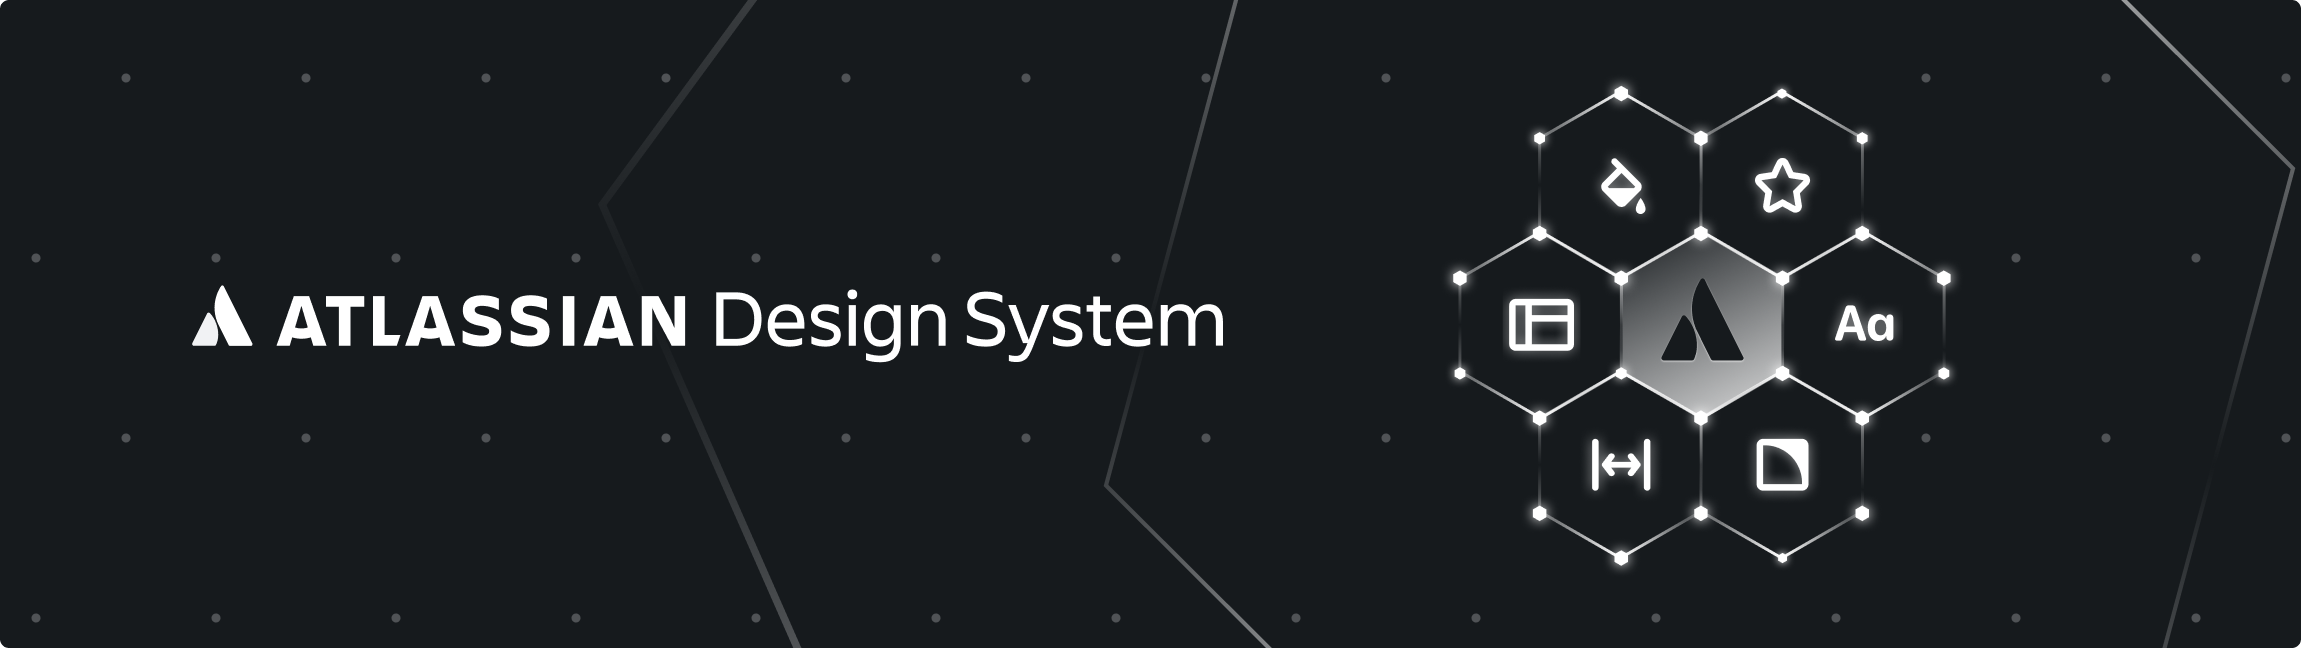 An image showing the Atlassian Design System logo on a dark background with a star-like grid in the background, with a set of concentric hexagons containing iconographic representations of Atlassian Design System's foundations: colors, icons, typography, border radius, sizing, and layout.